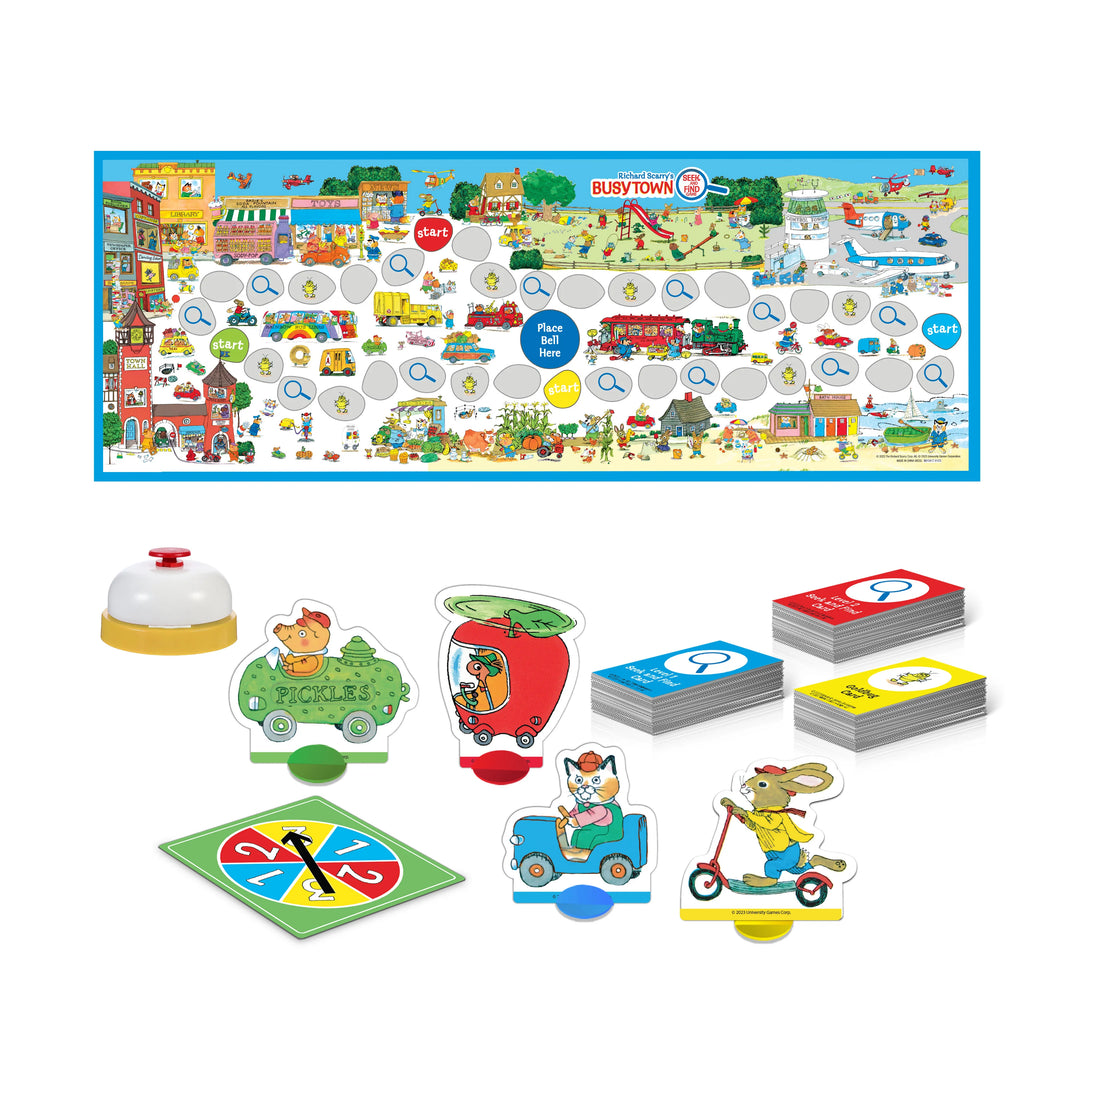 Richard Scarry's Busytown: Seek & Find Game Preview #3